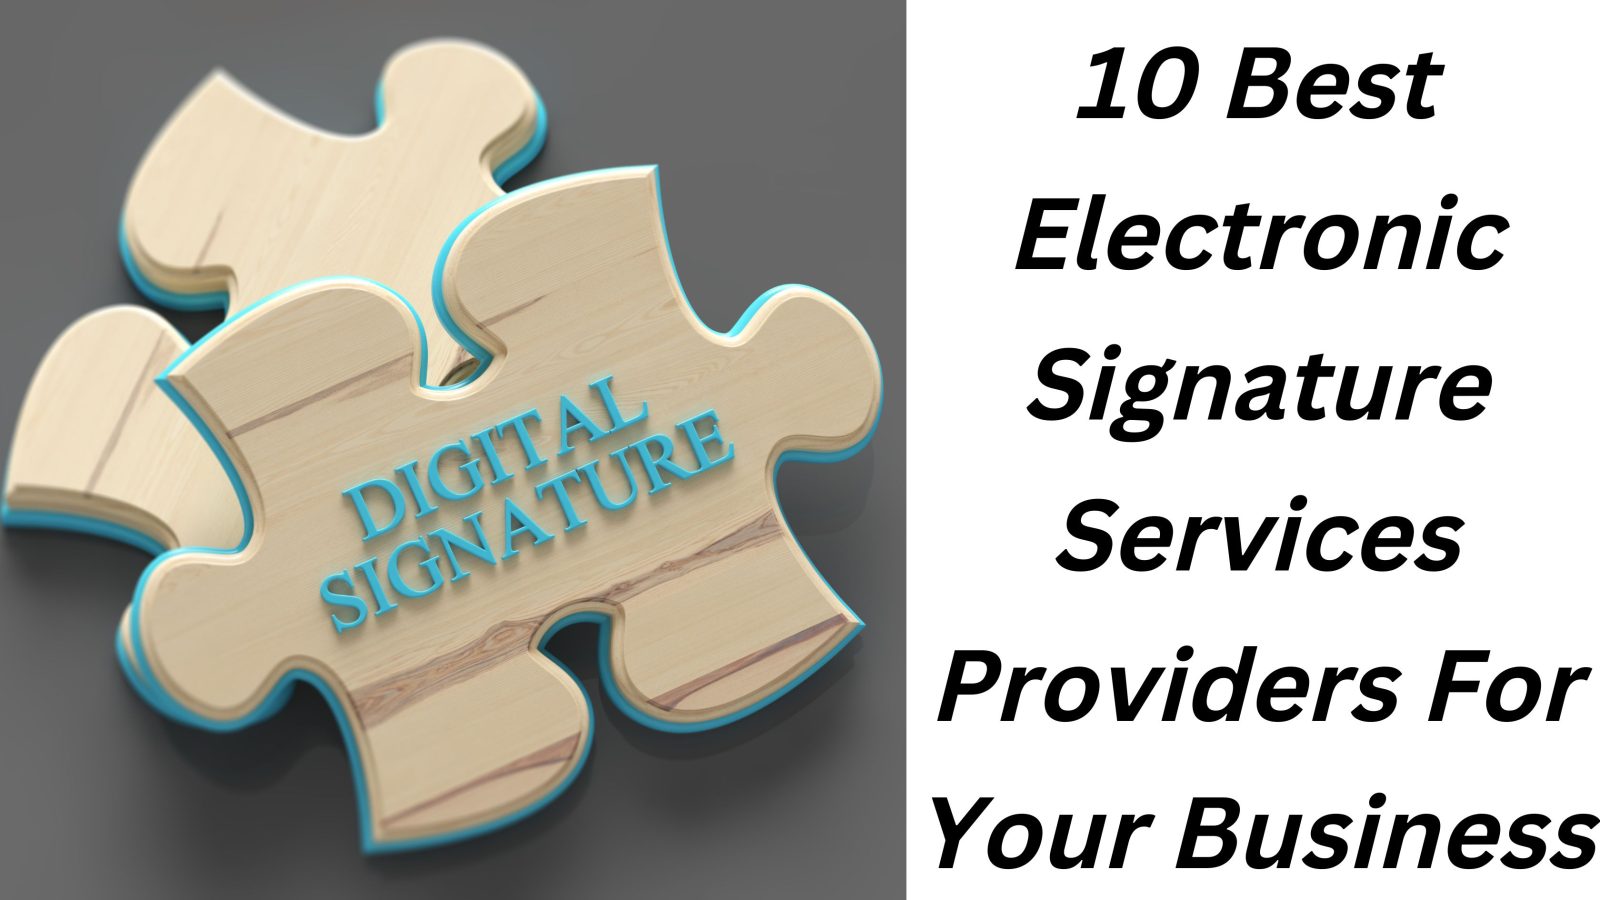 10 Best Electronic Signature Services Providers For Your Business